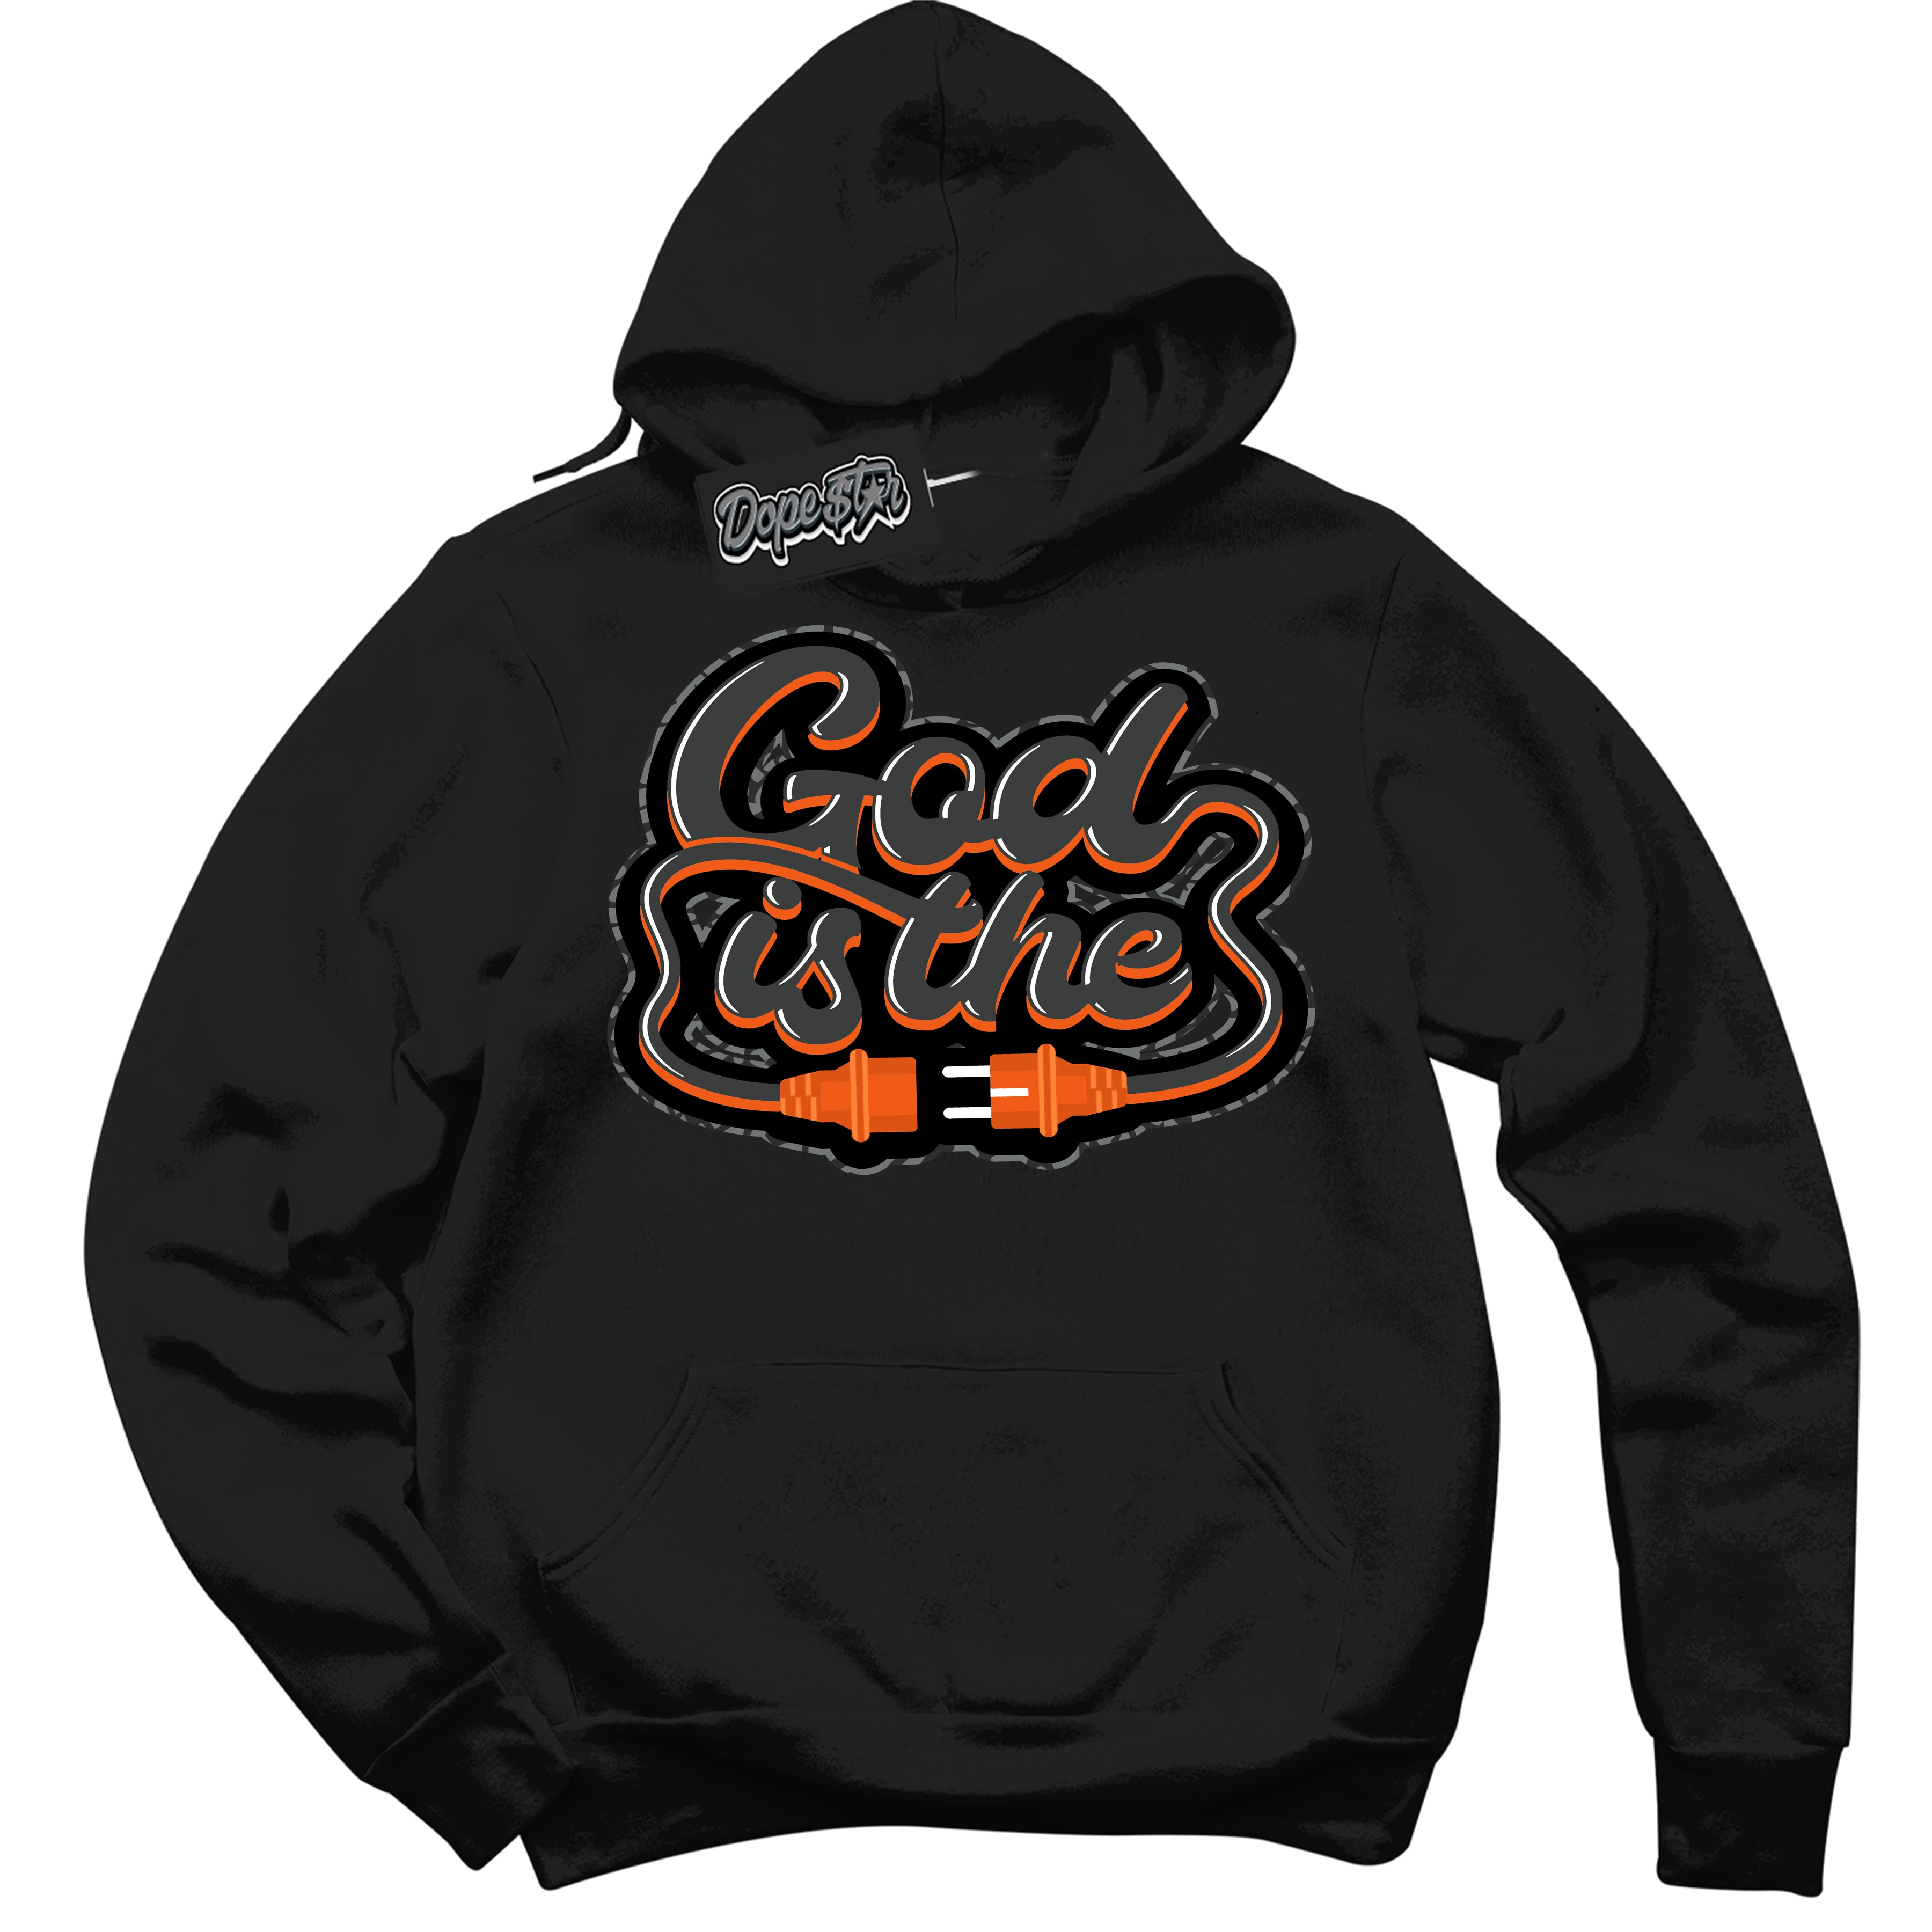 Cool Black Graphic DopeStar Hoodie with “  God Is The  “ print, that perfectly matches Fear Pack 3s sneakers